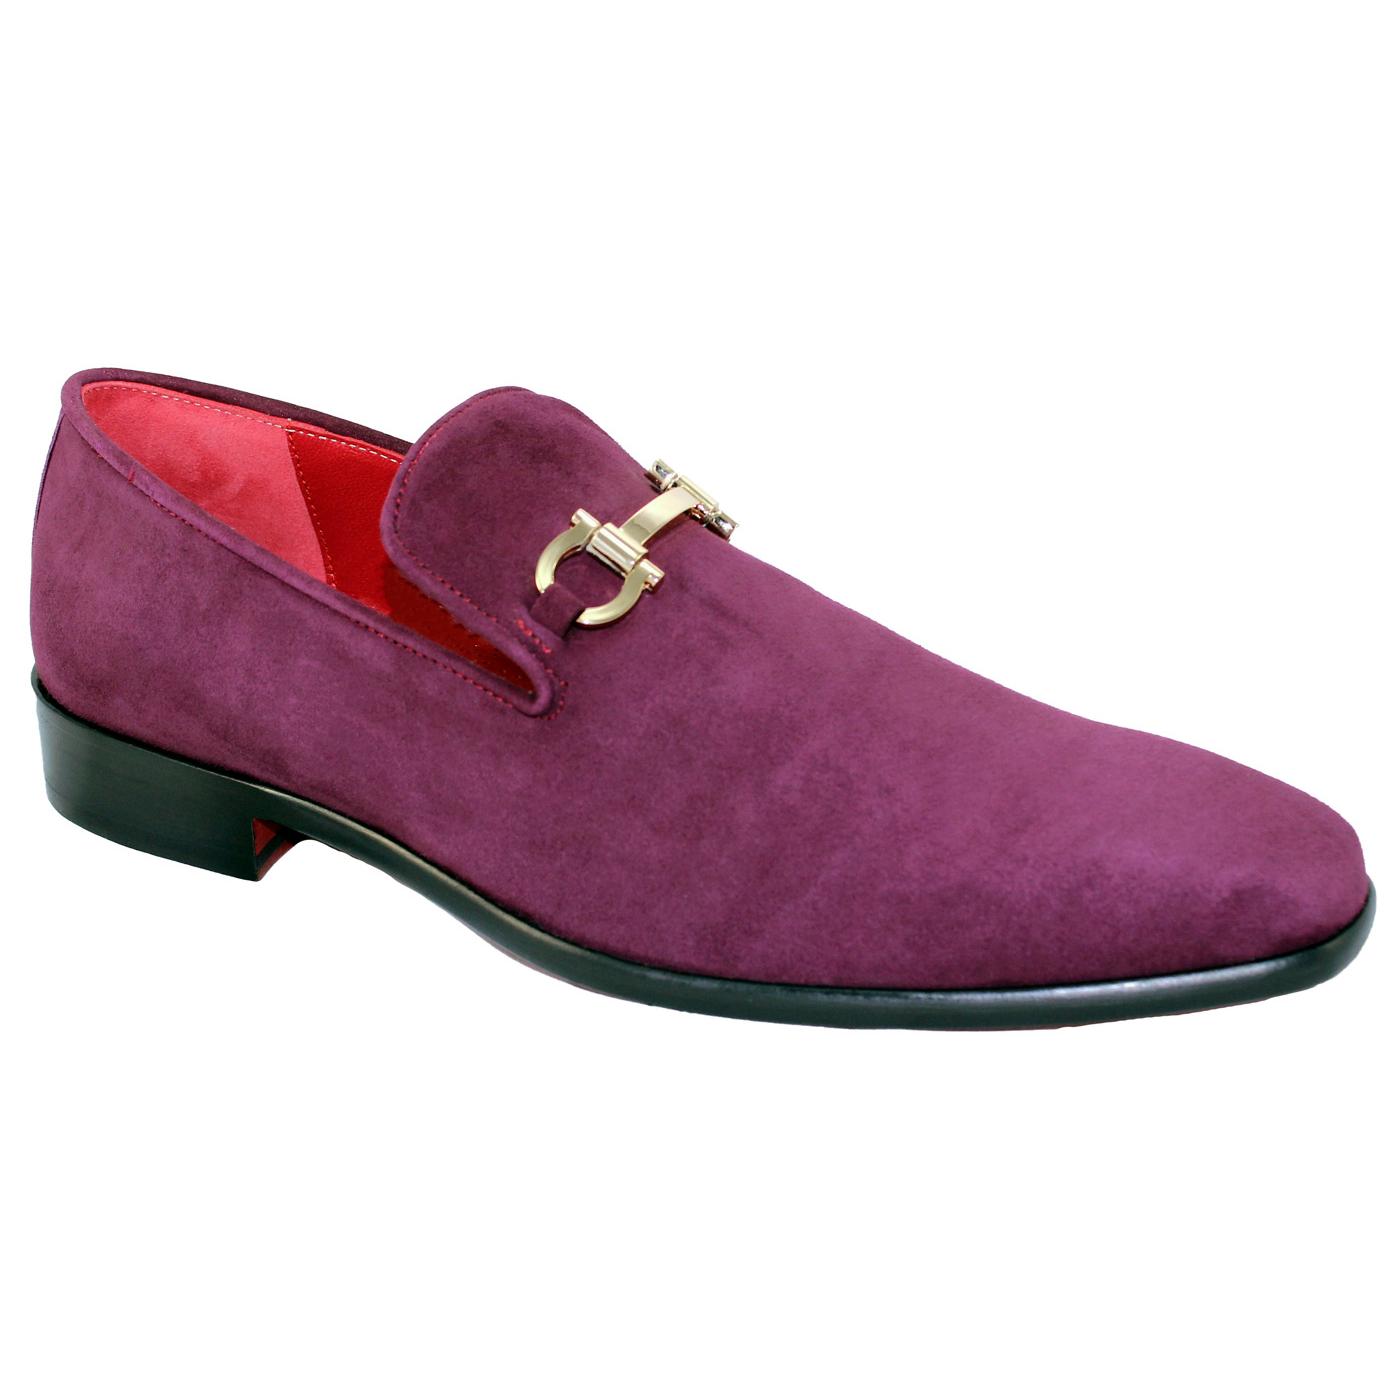 Emilio Franco 13 Burgundy Genuine Suede Leather Loafer Shoes With ...